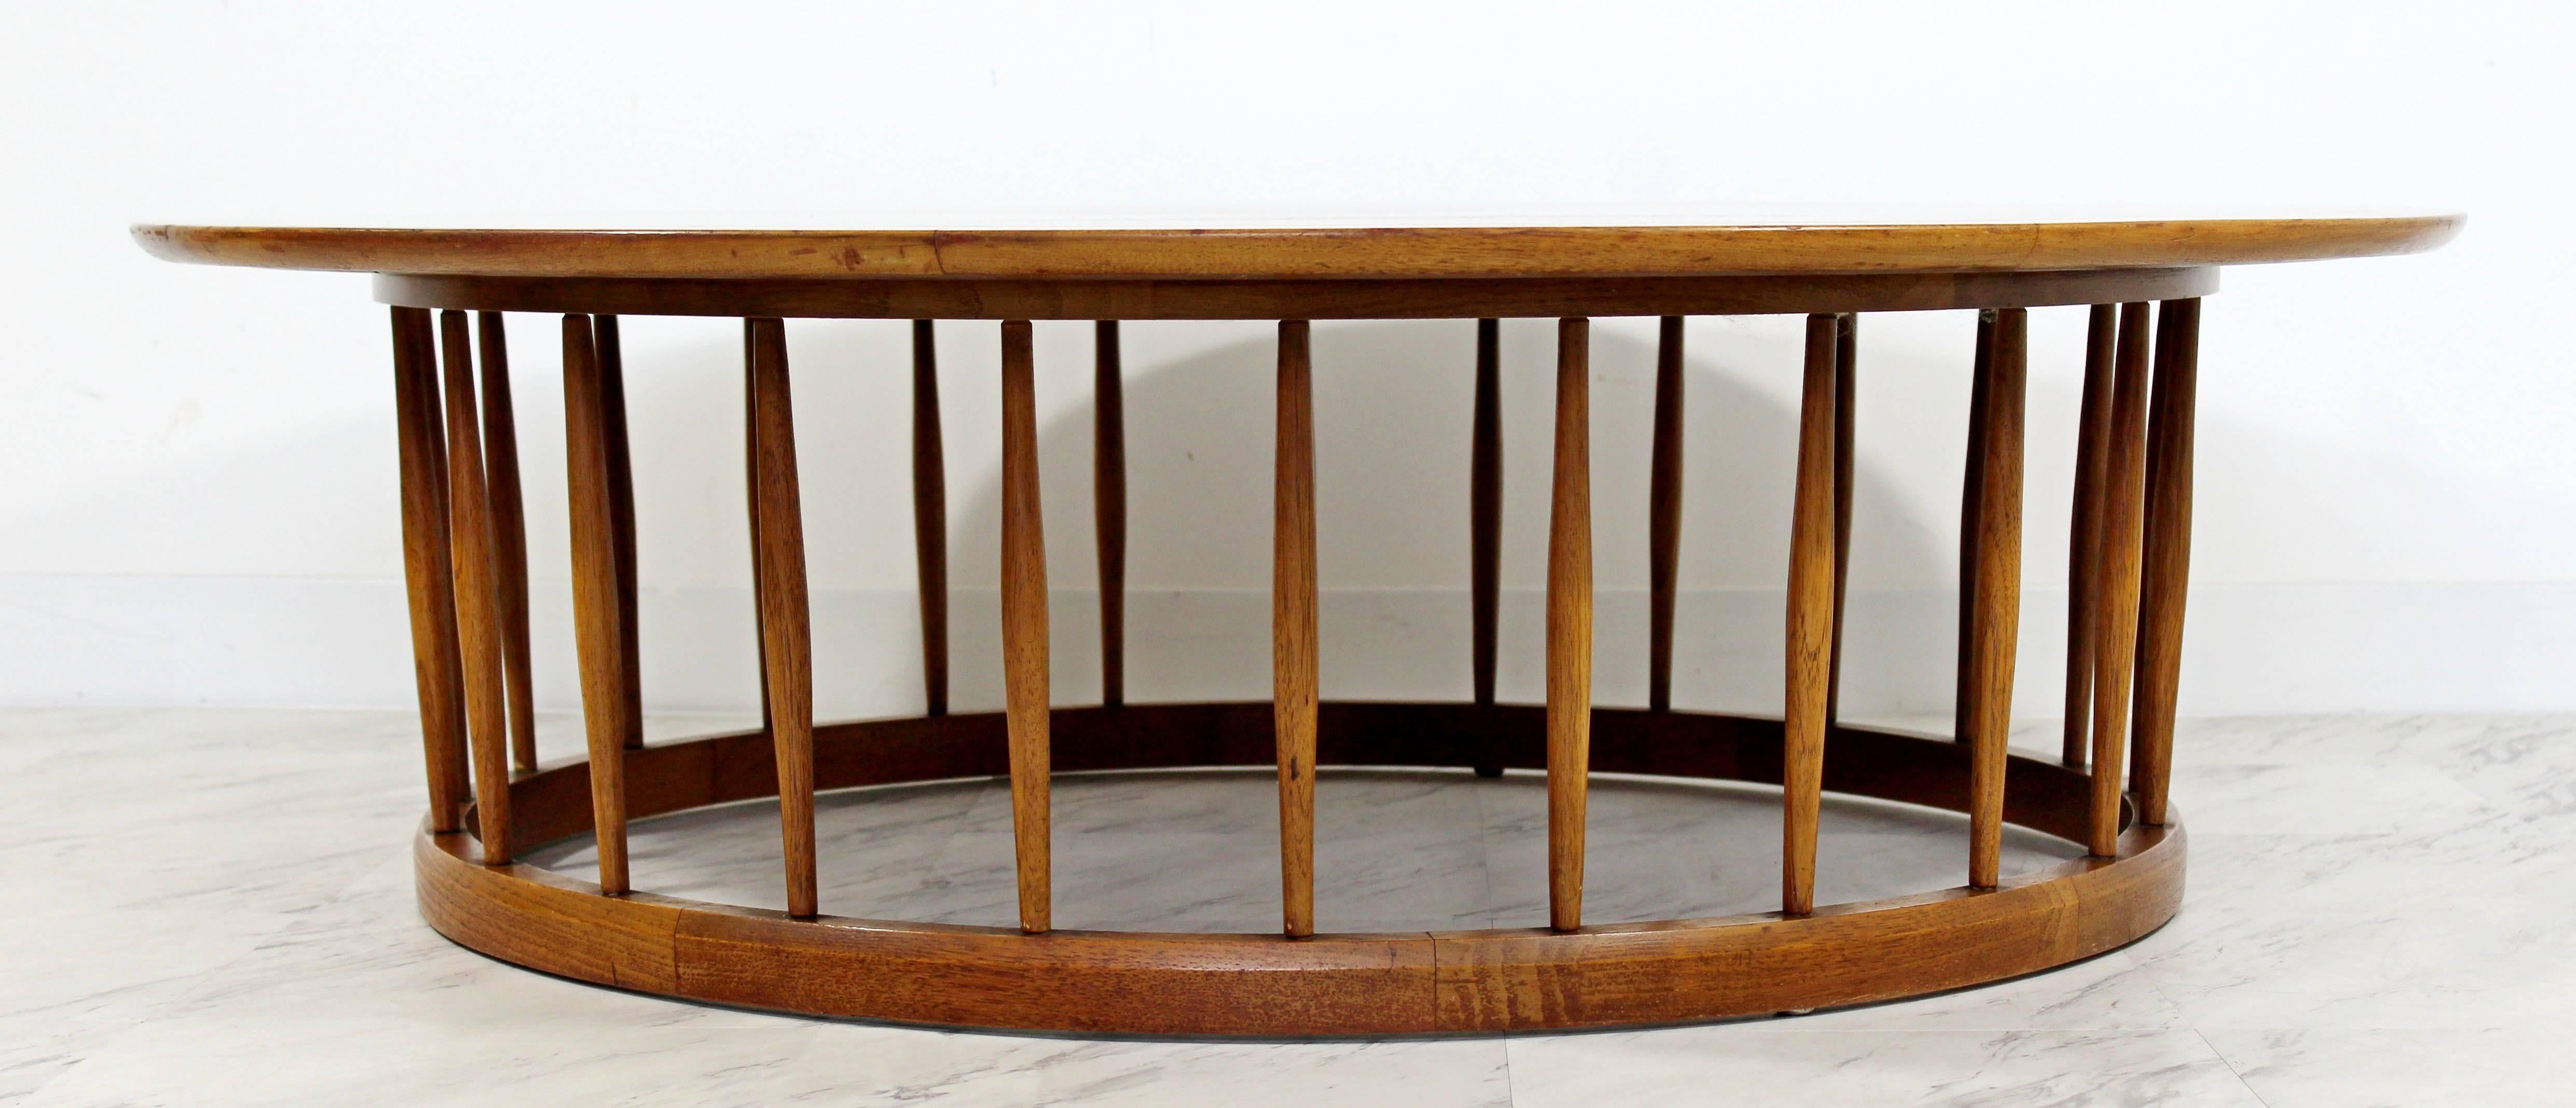 For your consideration is a magnificent, circular, walnut spindle base, coffee table by Drexel, circa the 1950s. In excellent condition. The dimensions are 48